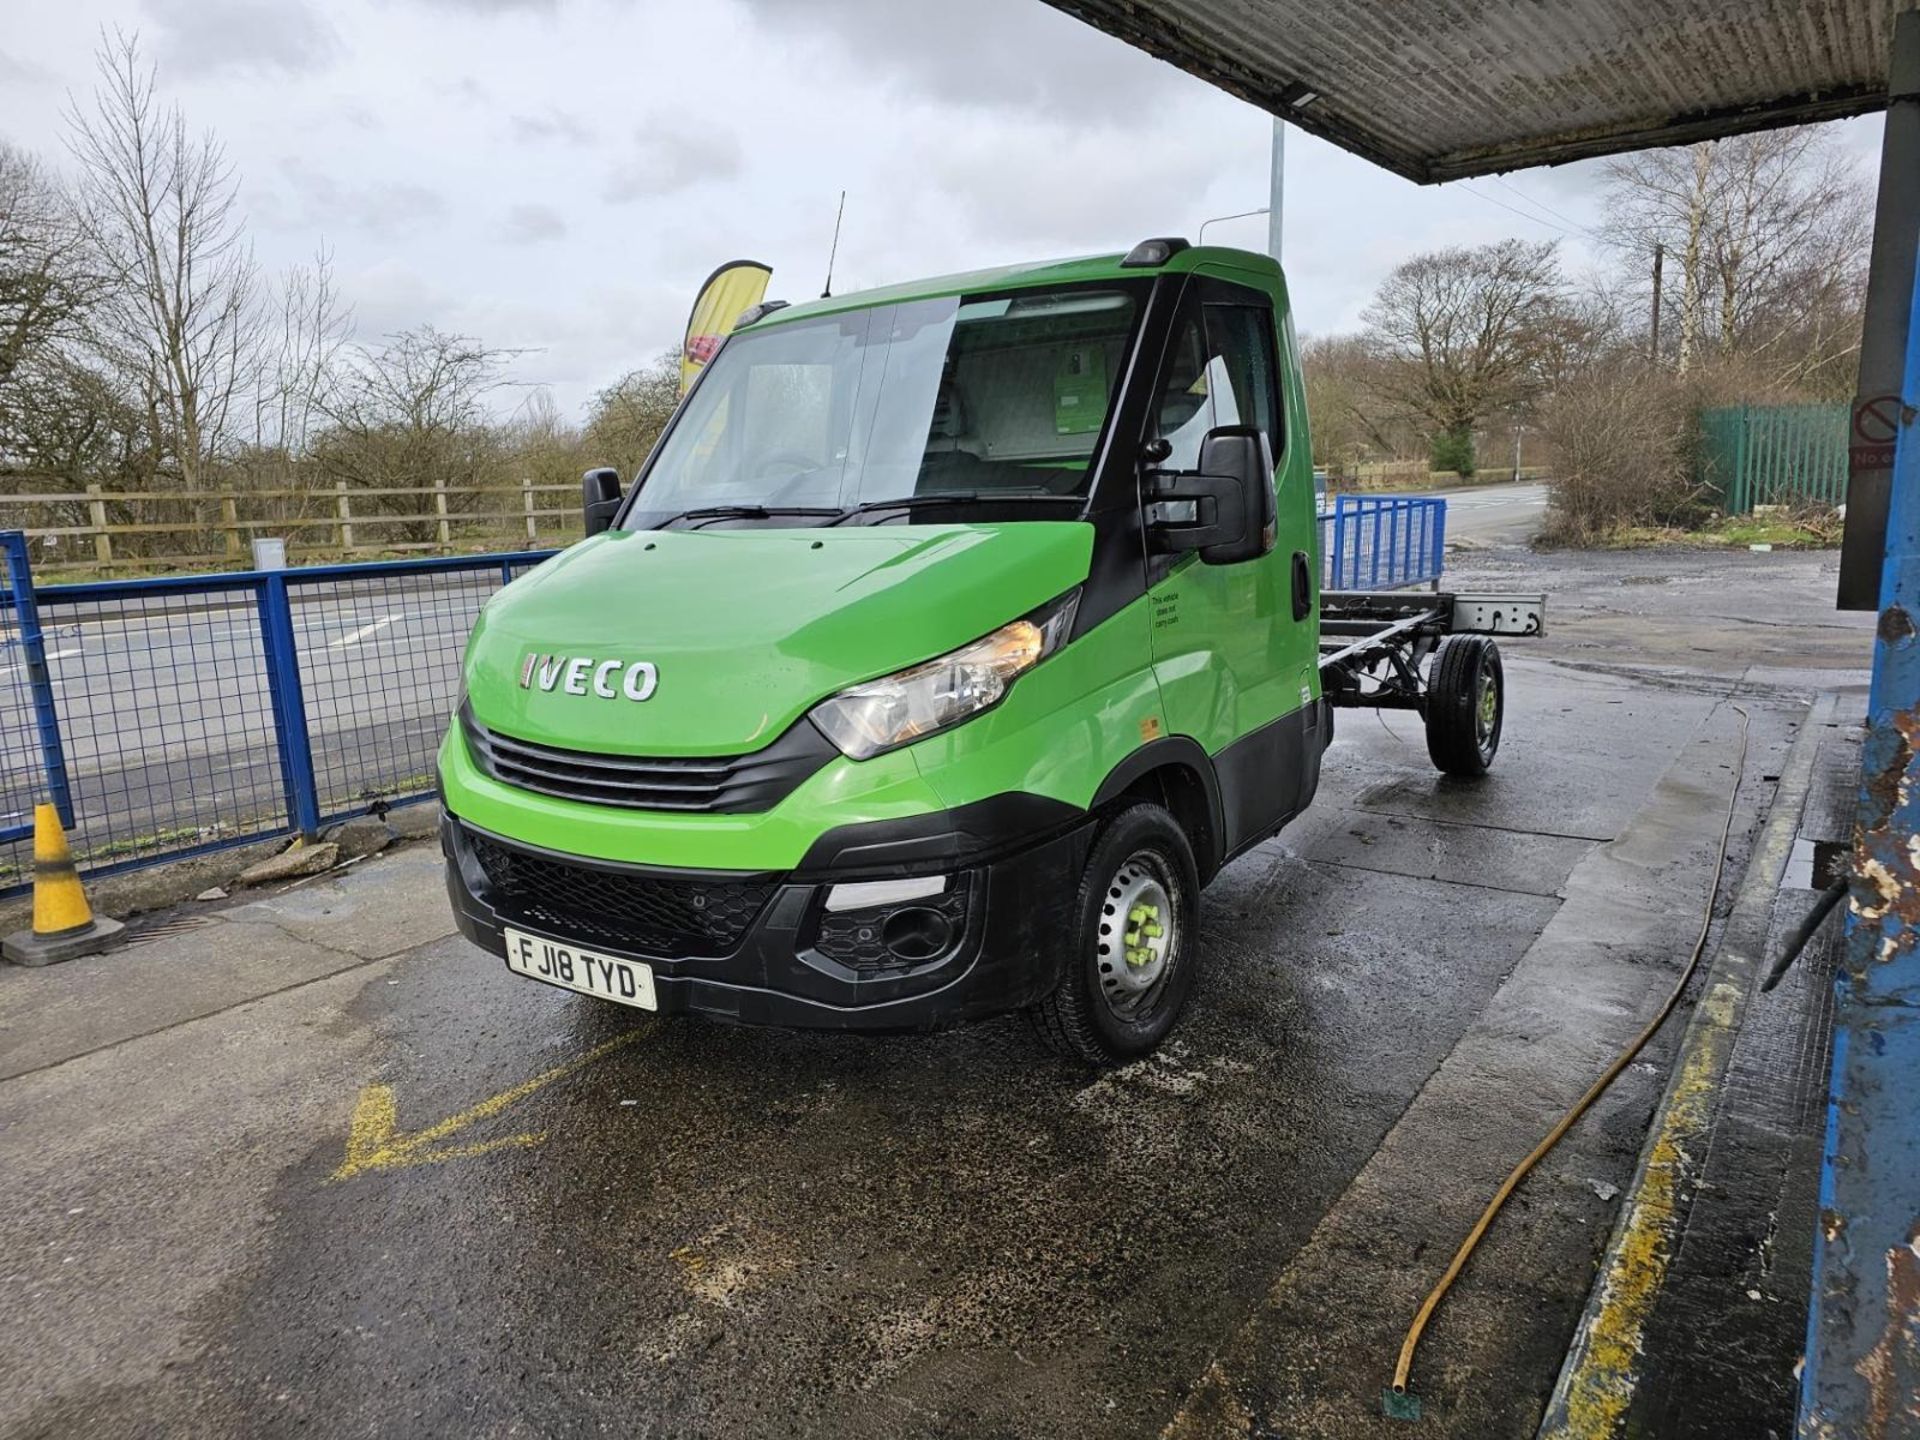 2018 IVECO DAILY 35S12 AUTOEURO6 CHASSIS CAB - Image 2 of 11